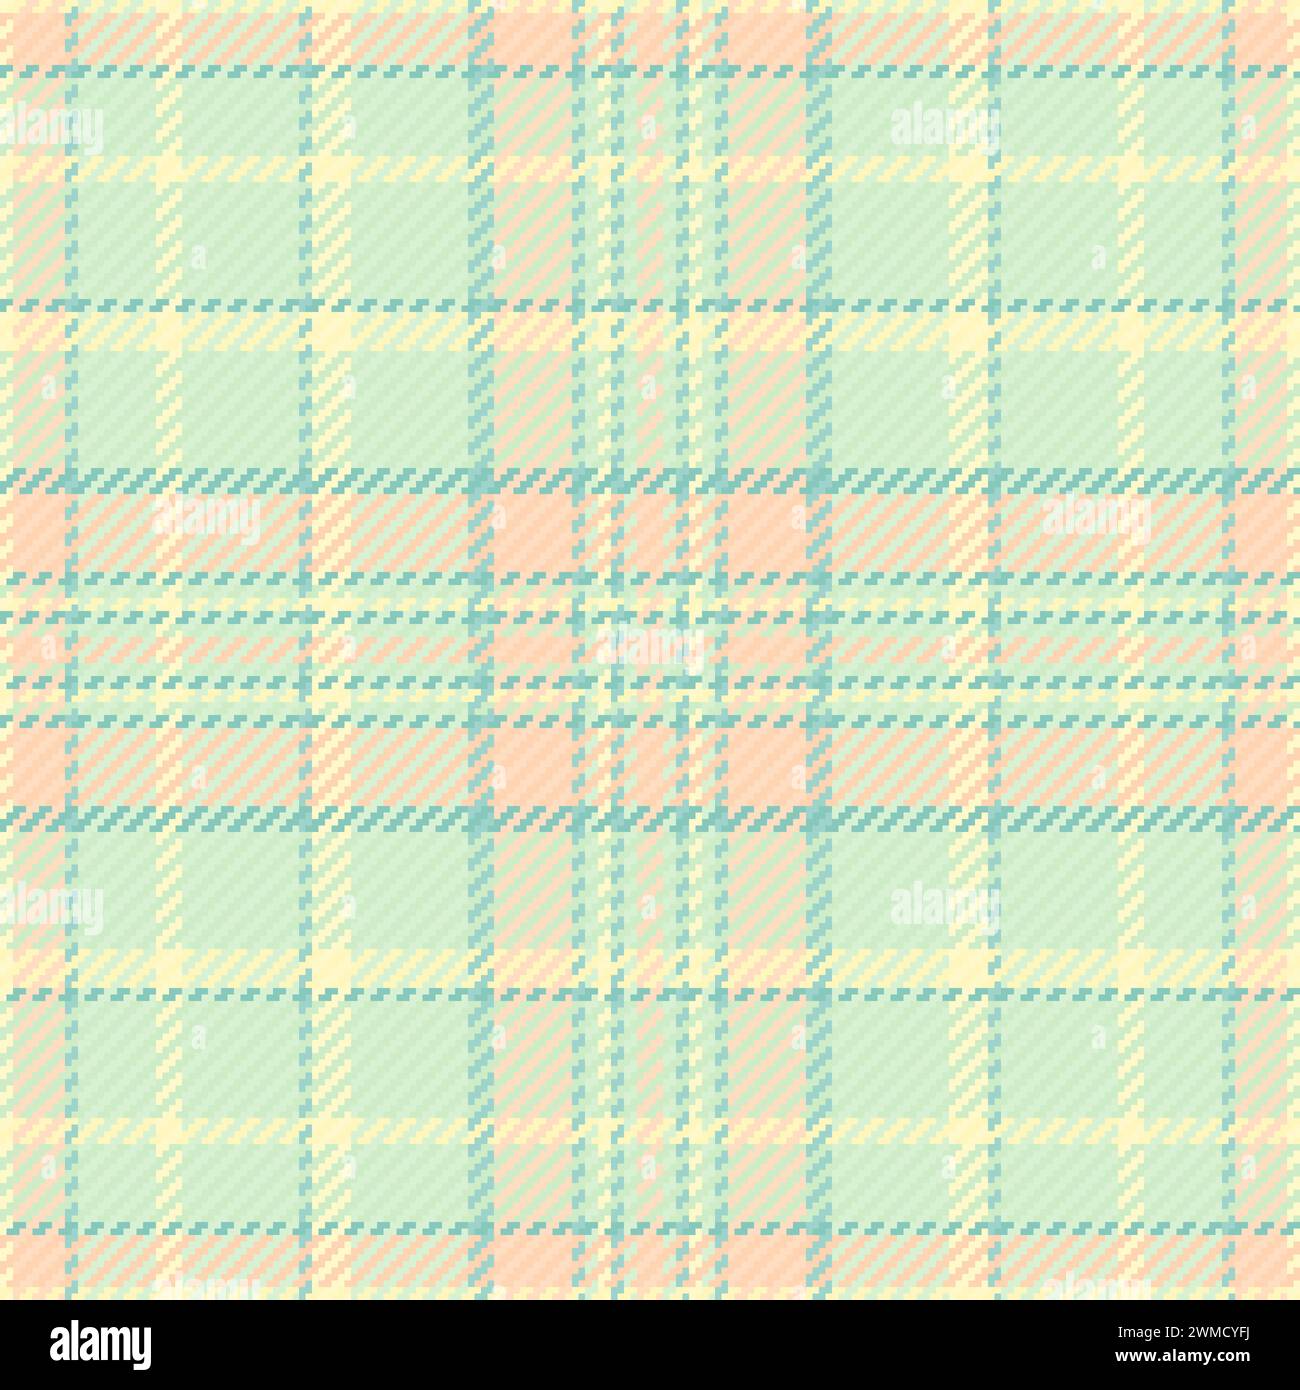 Texture textile vector of seamless background plaid with a pattern fabric tartan check in light and lemon chiffon colors. Stock Vector